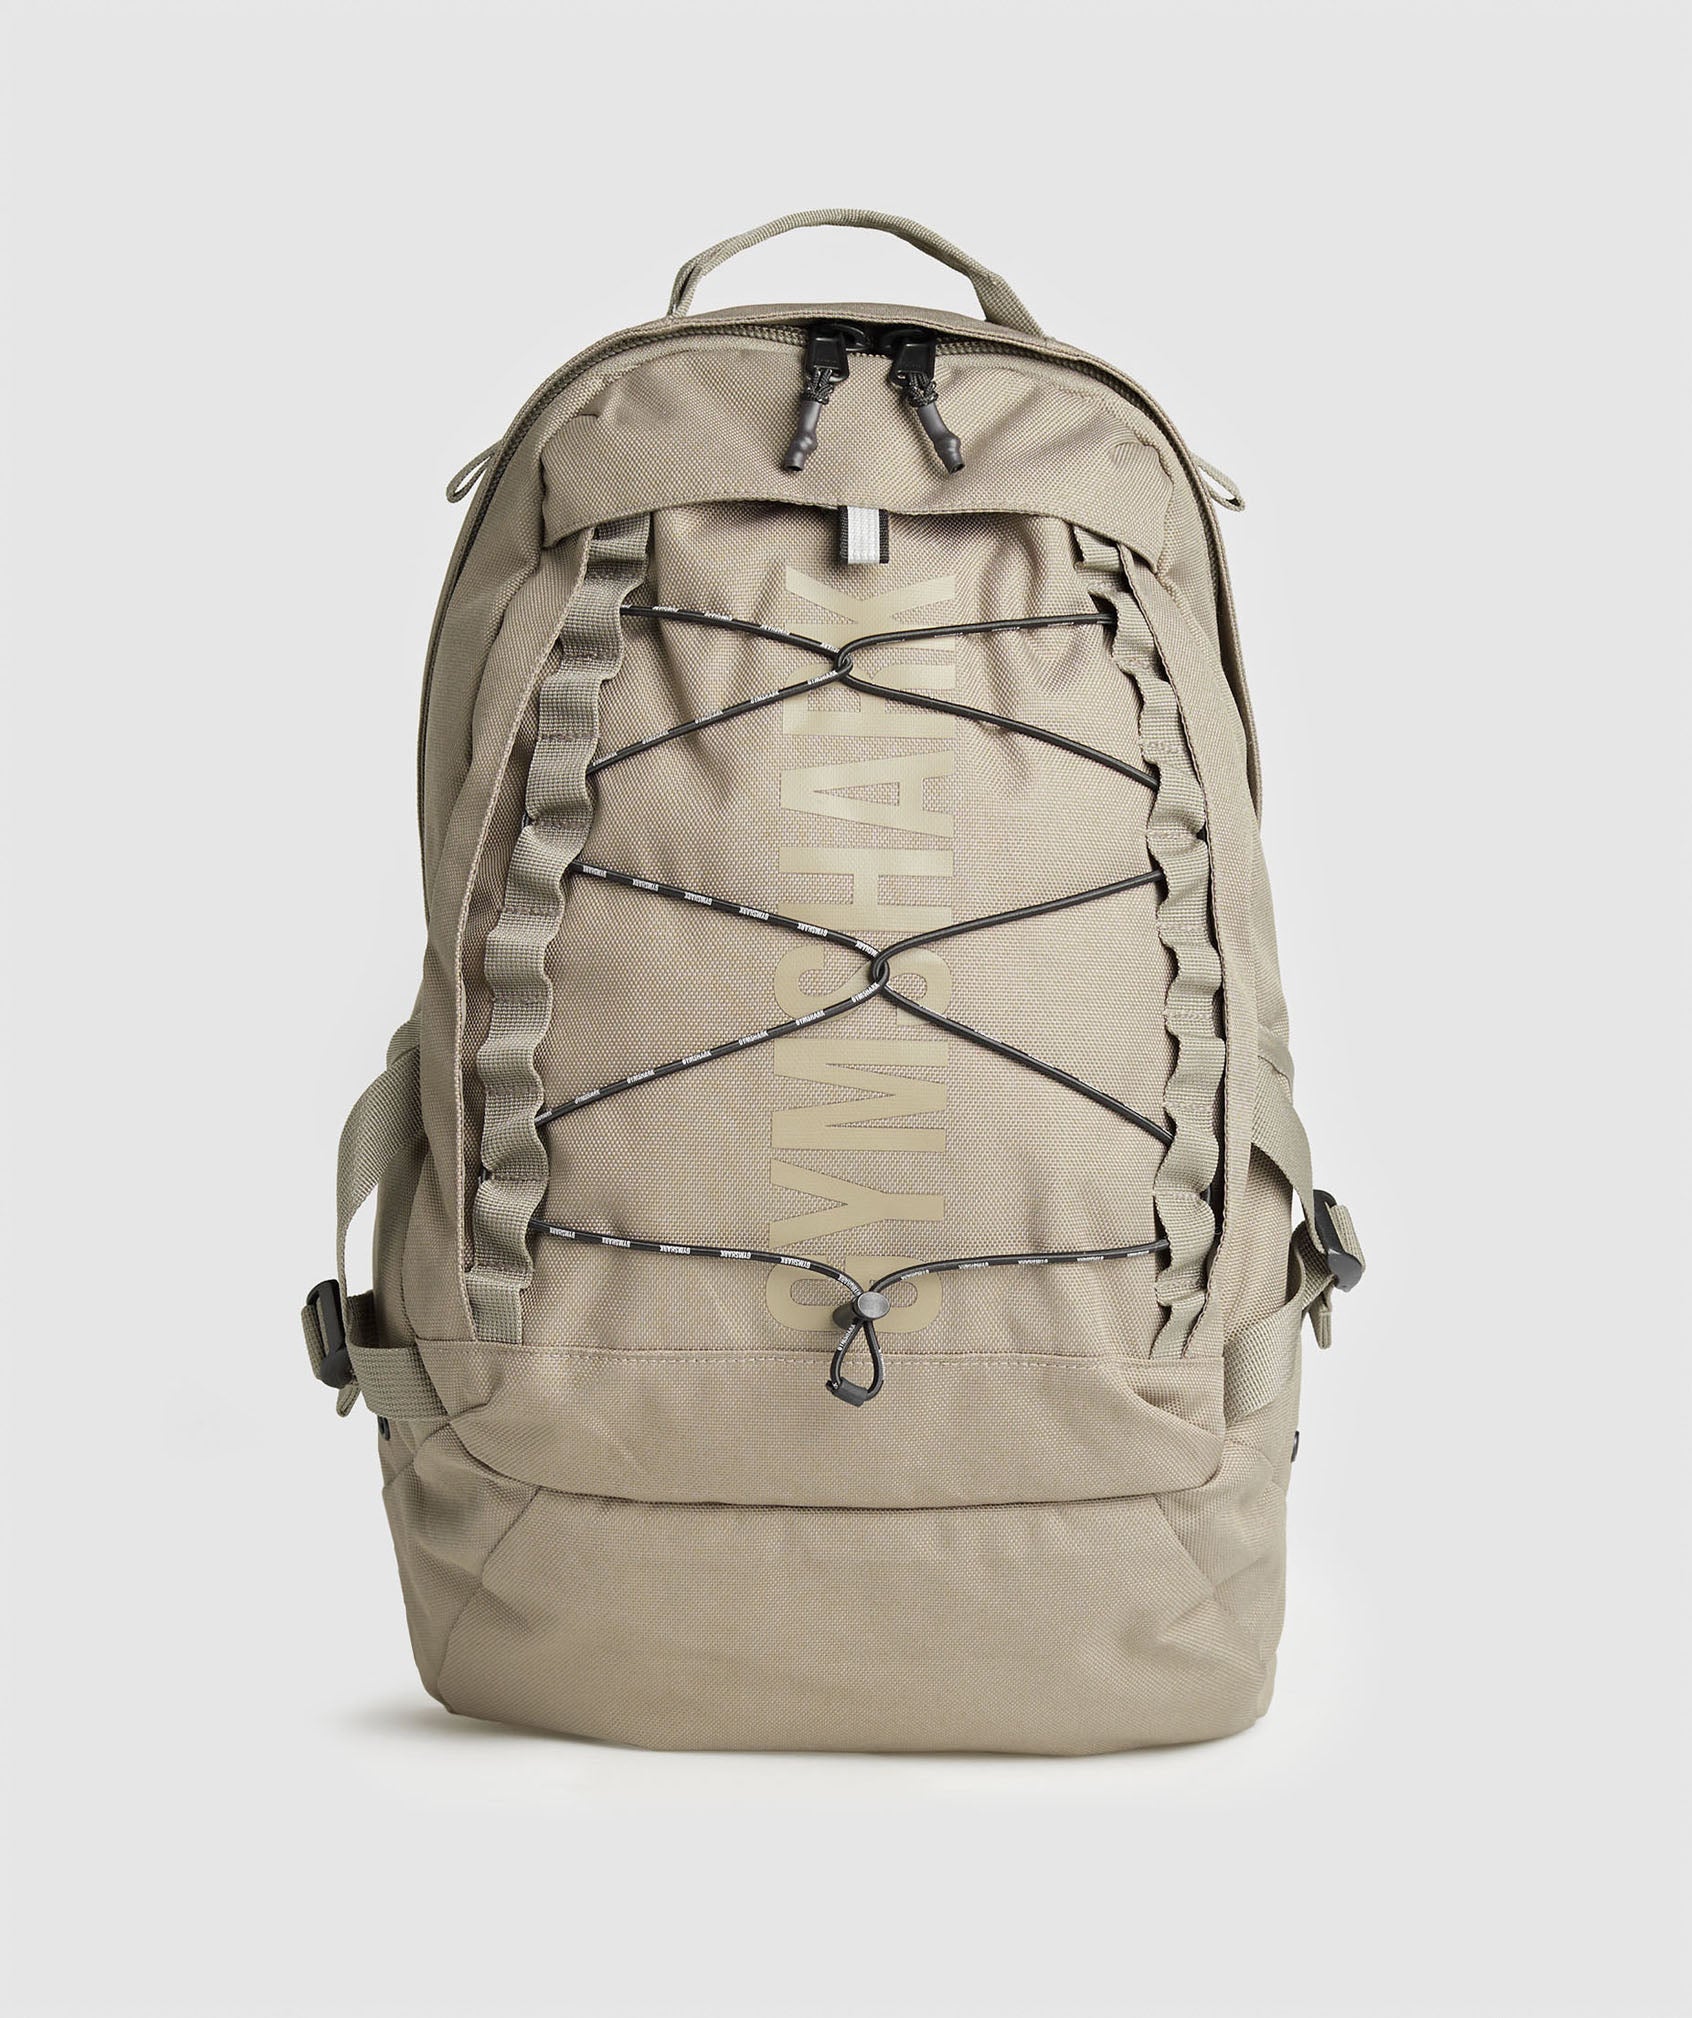 Pursuit Backpack in Brown